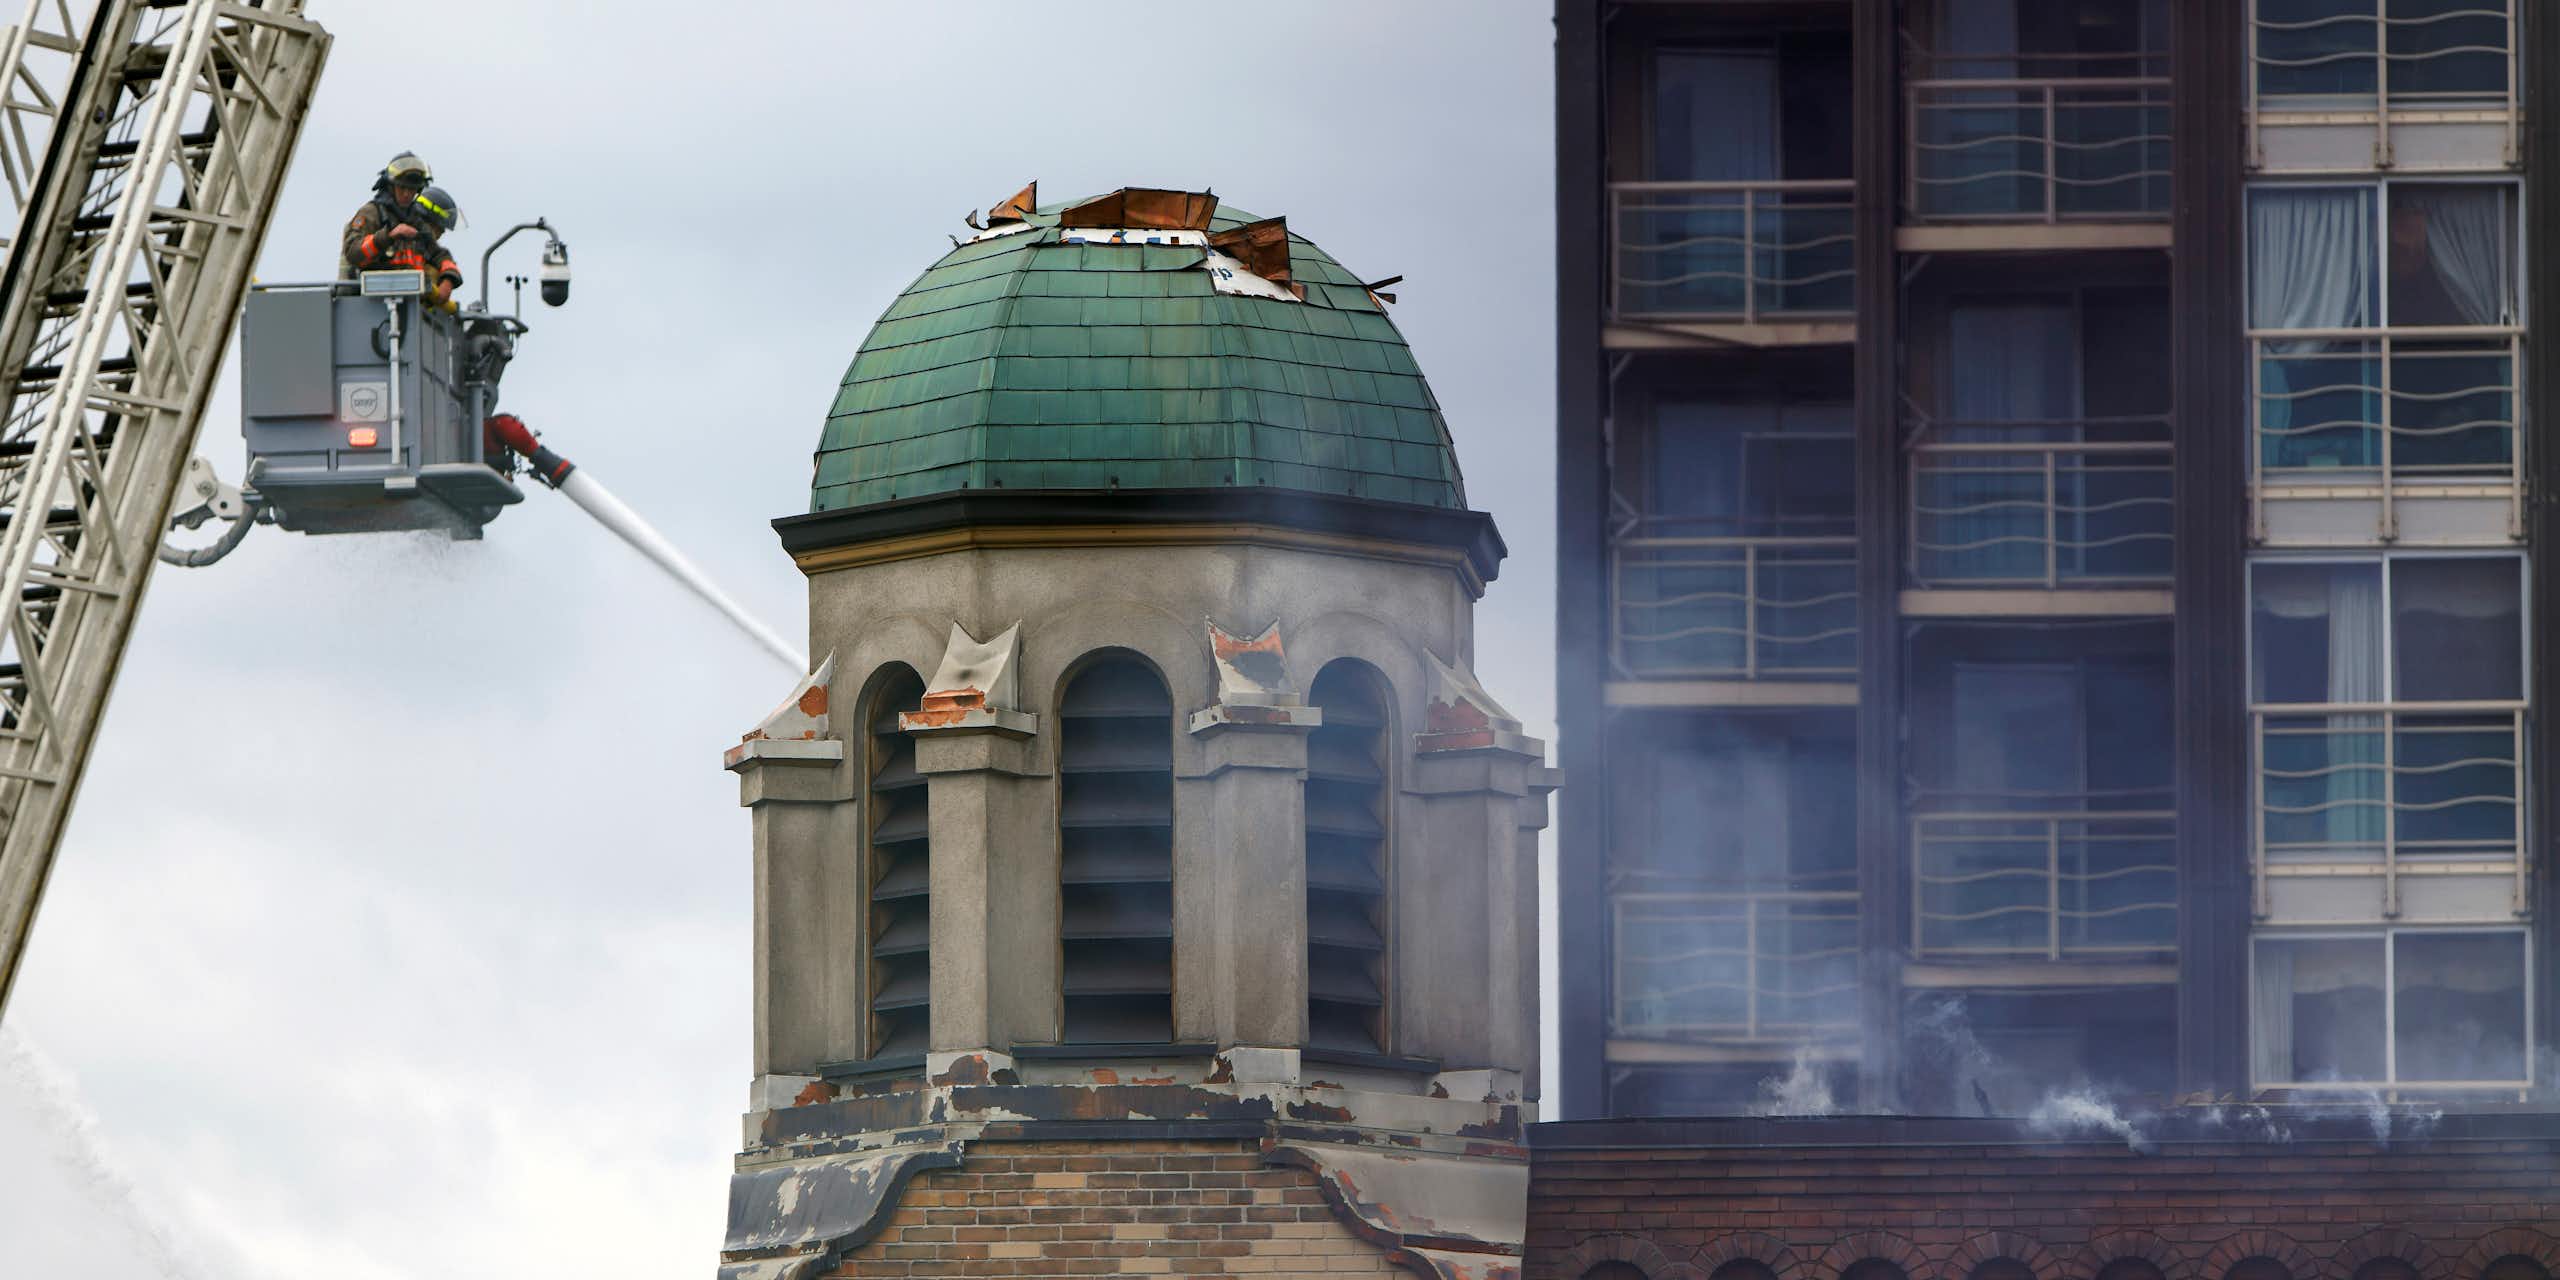 a firefighter on a crane sprays water on a green dome